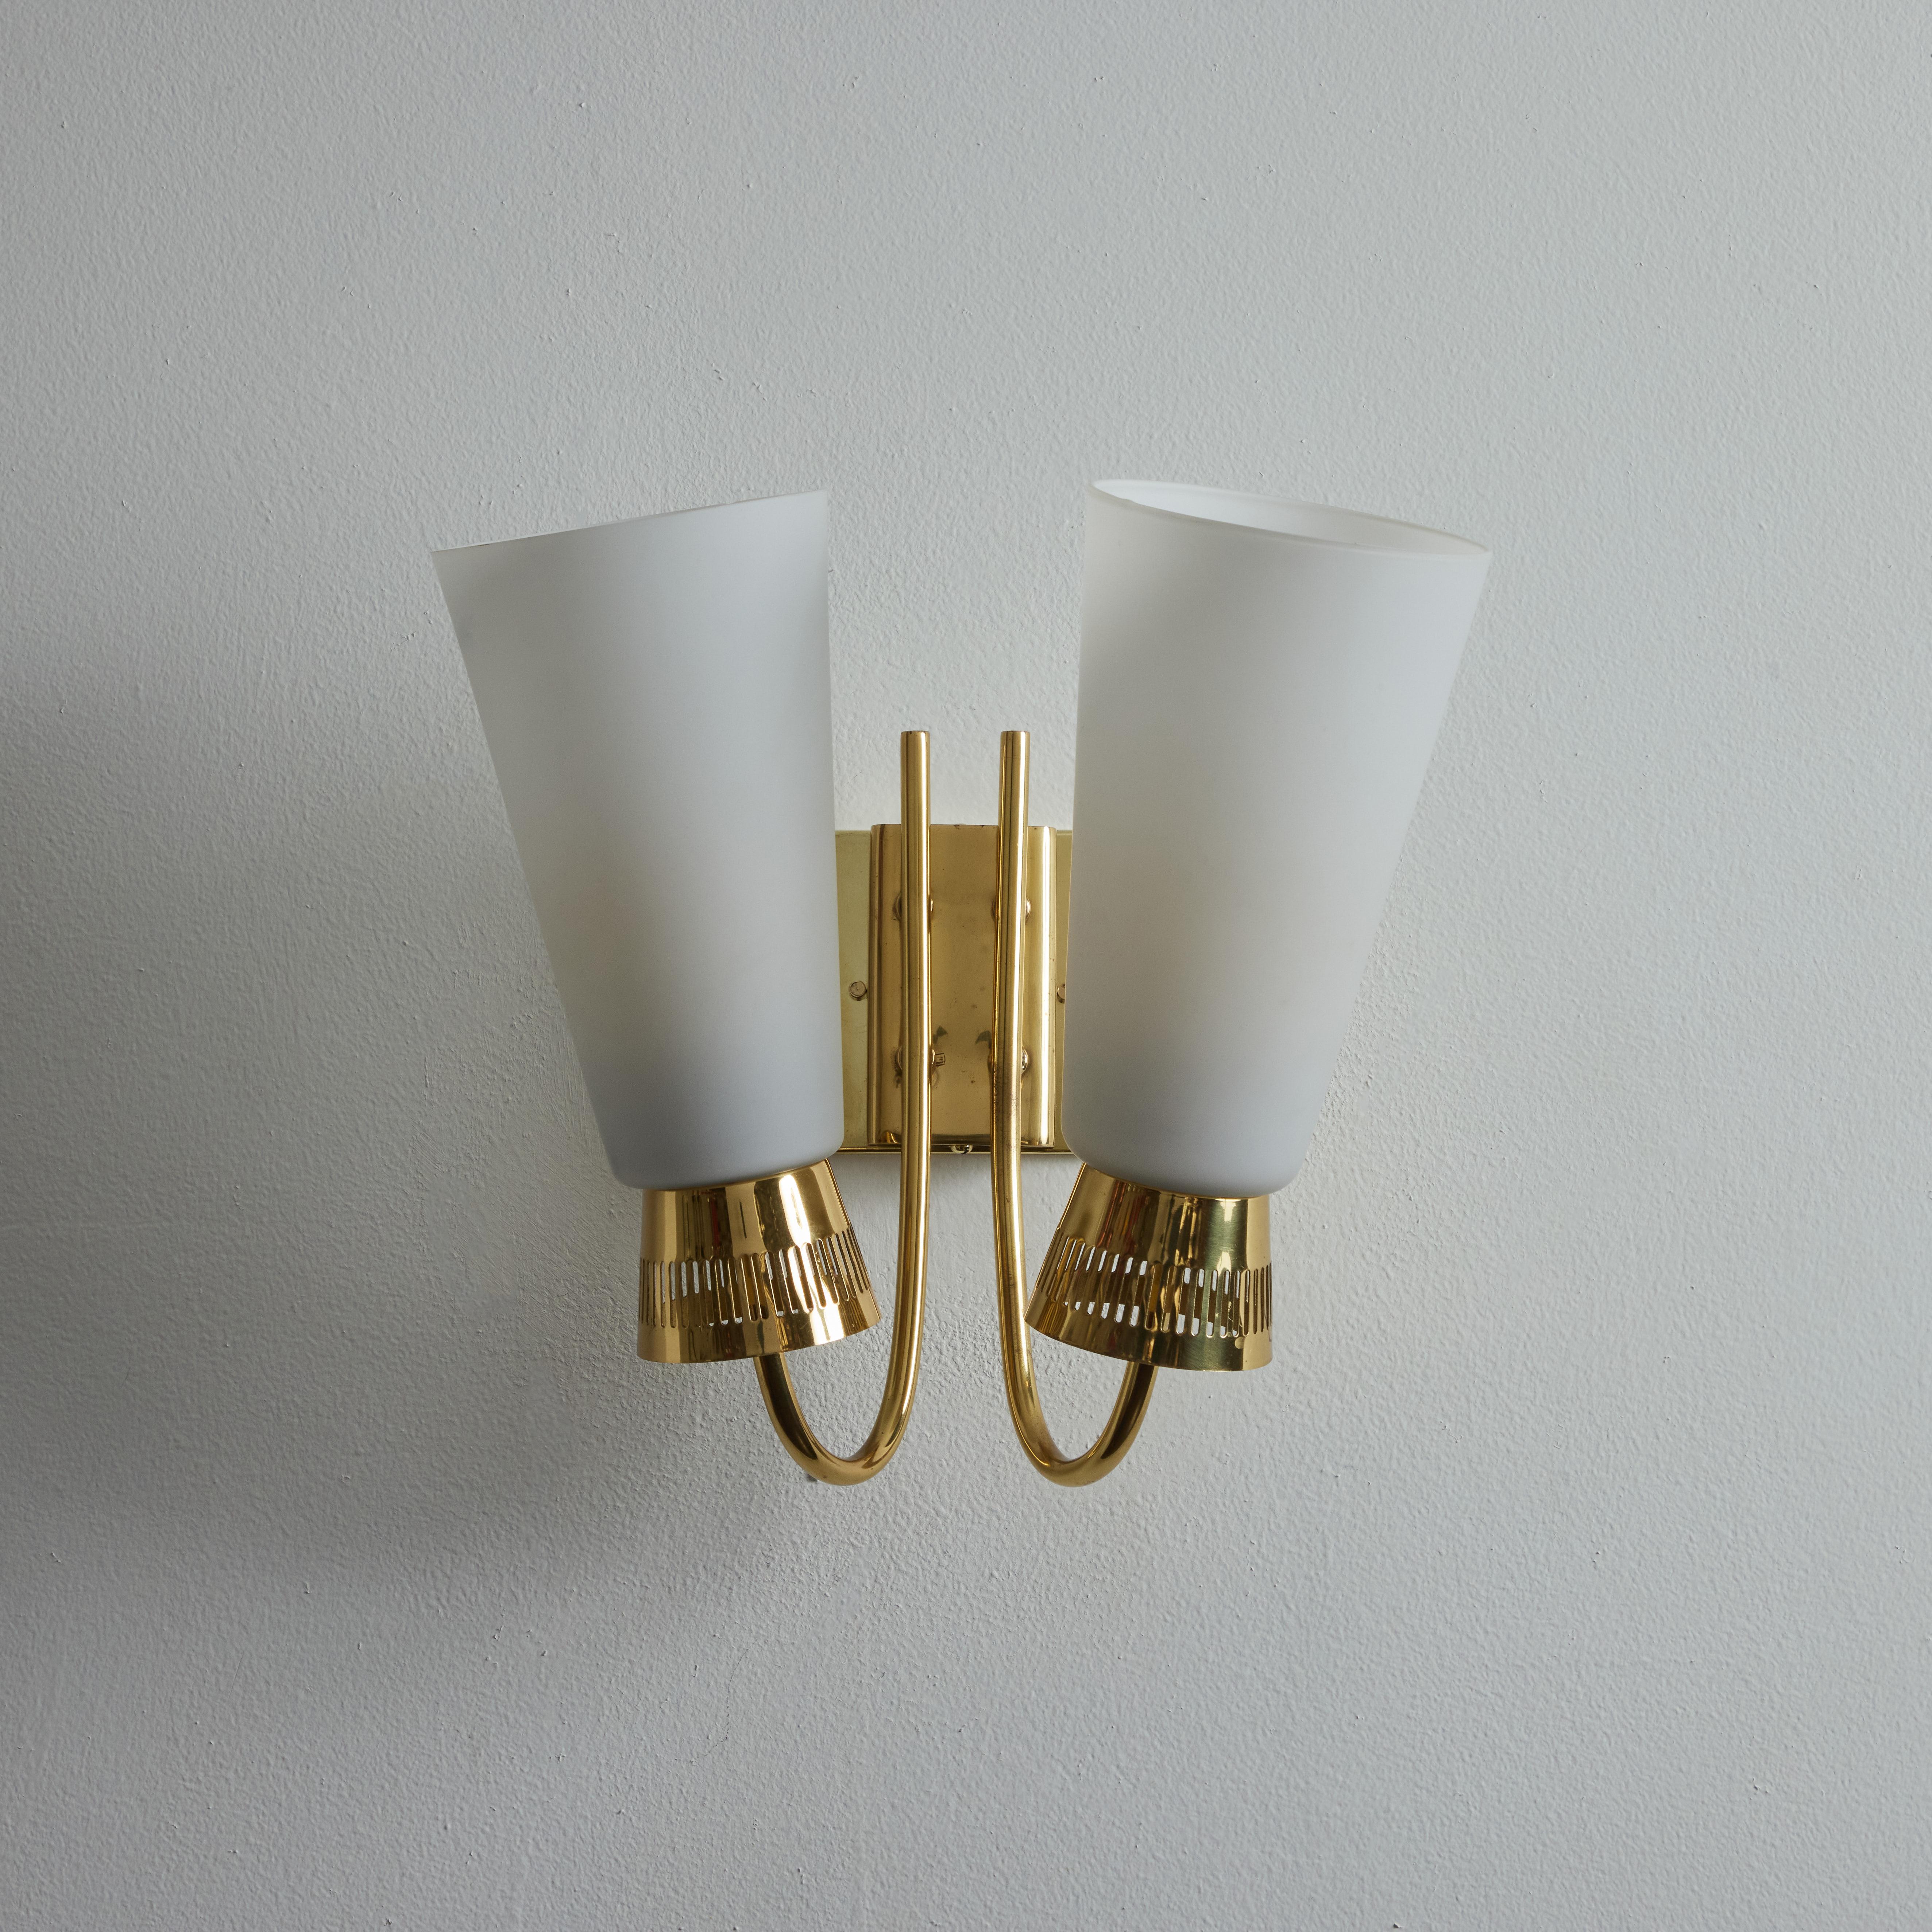 Mid-20th Century Pair of 1950s Mauri Almari Model #EY60 Brass & Glass Double Sconces for Itsu For Sale